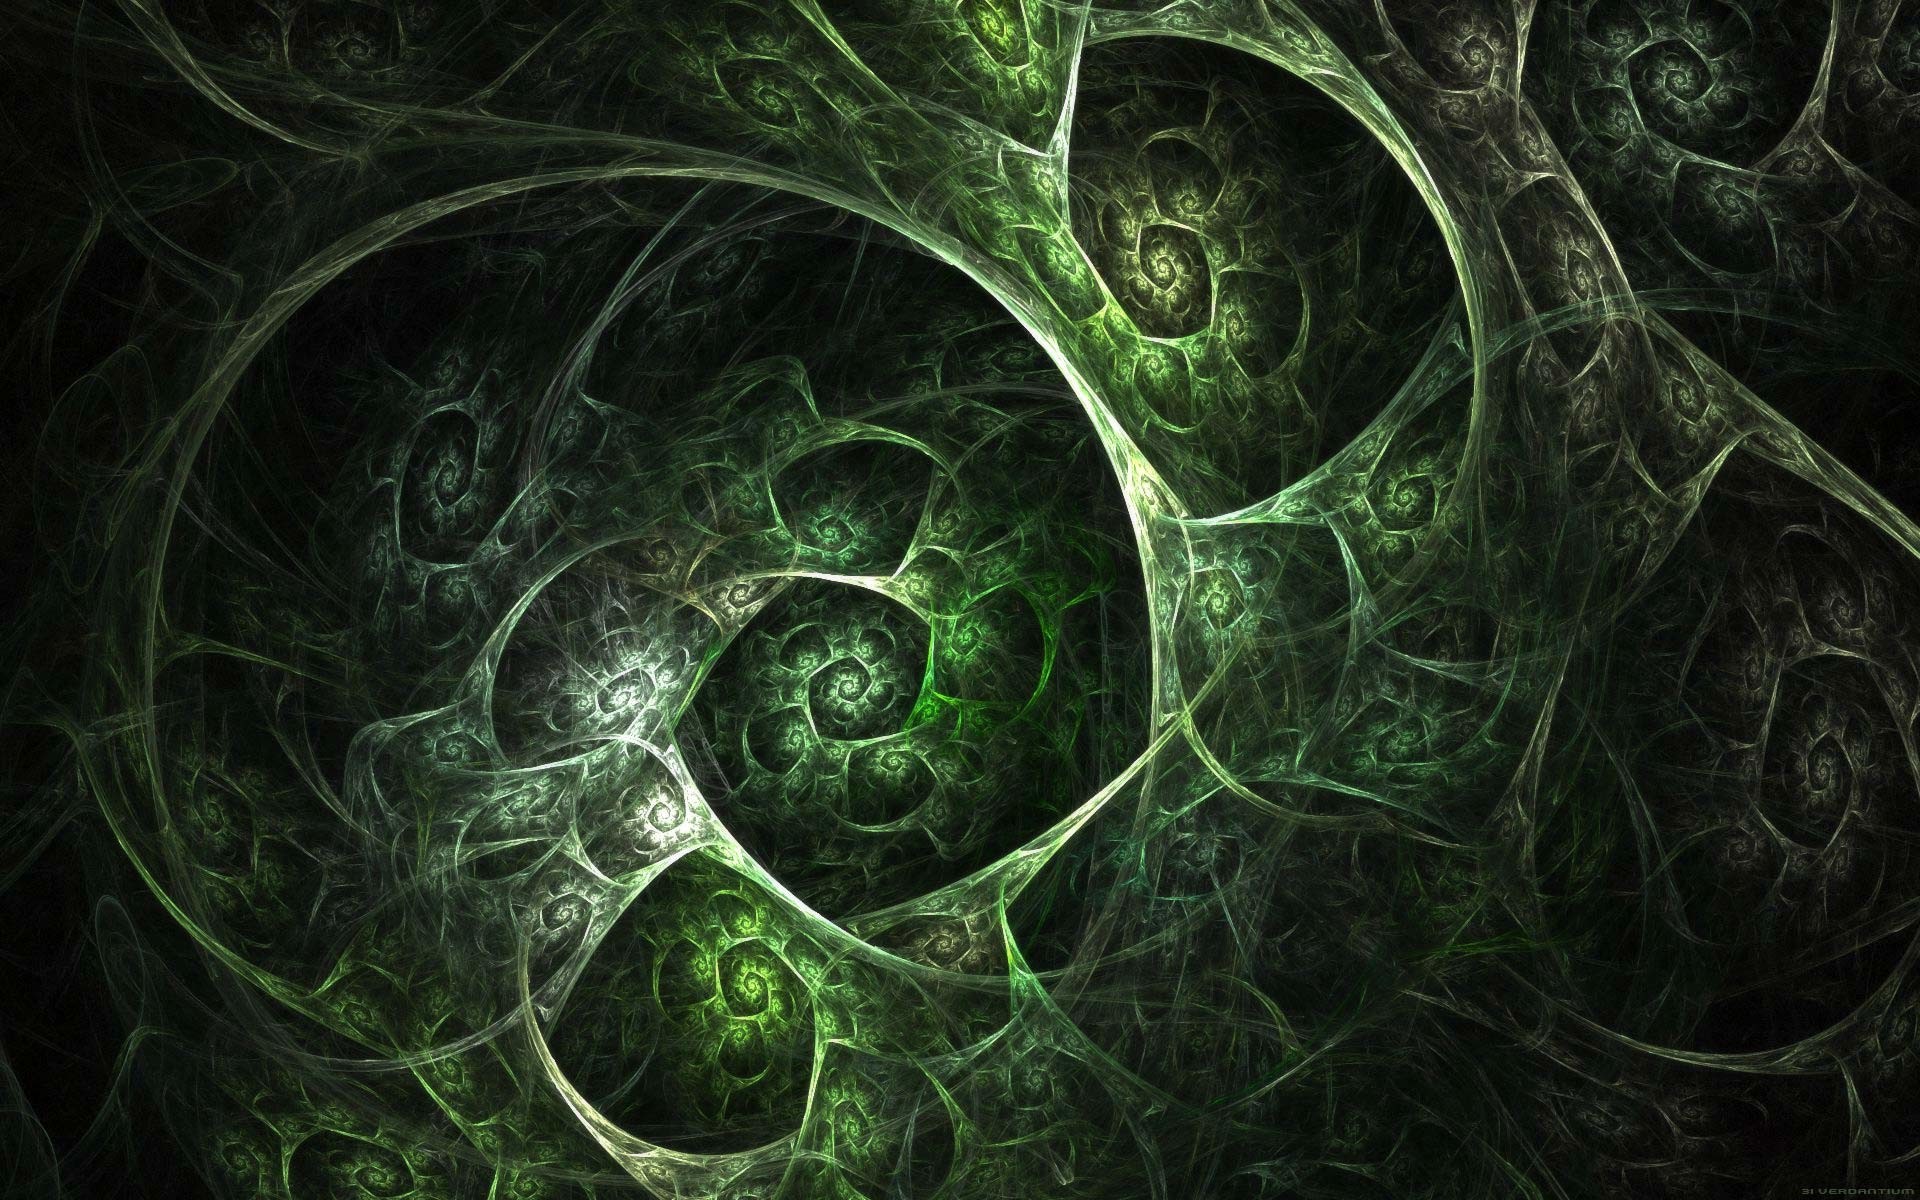 Green And Black Abstract Wallpaper 6 Free Wallpaper. Green And Black Abstract Wallpaper 6 Free Wallpaper